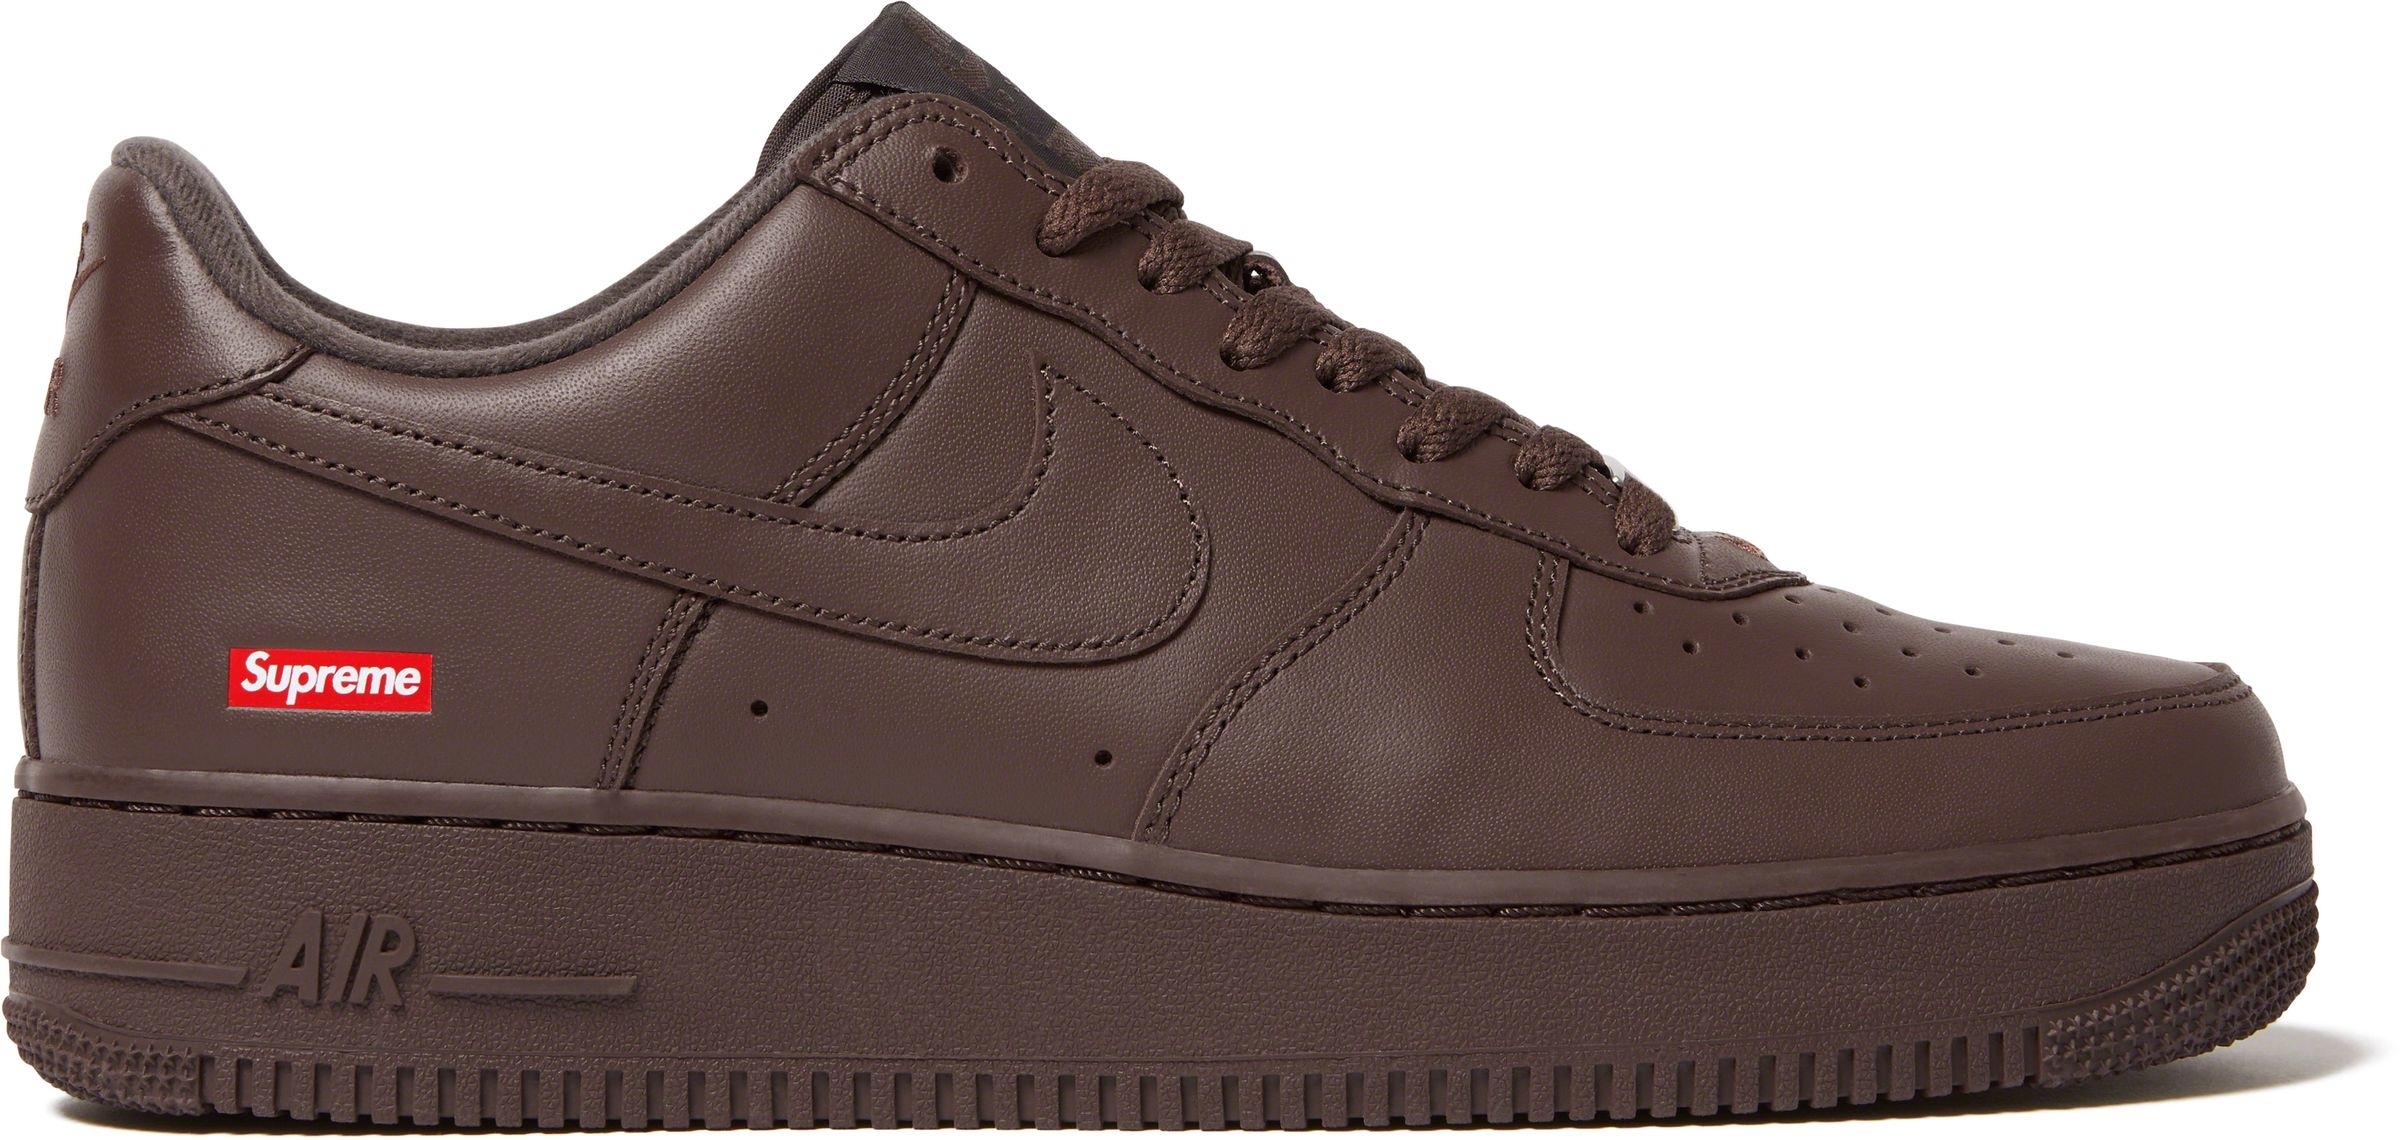 Supreme x Nike Air Force 1 Low 'Baroque Brown' Release Date | Complex